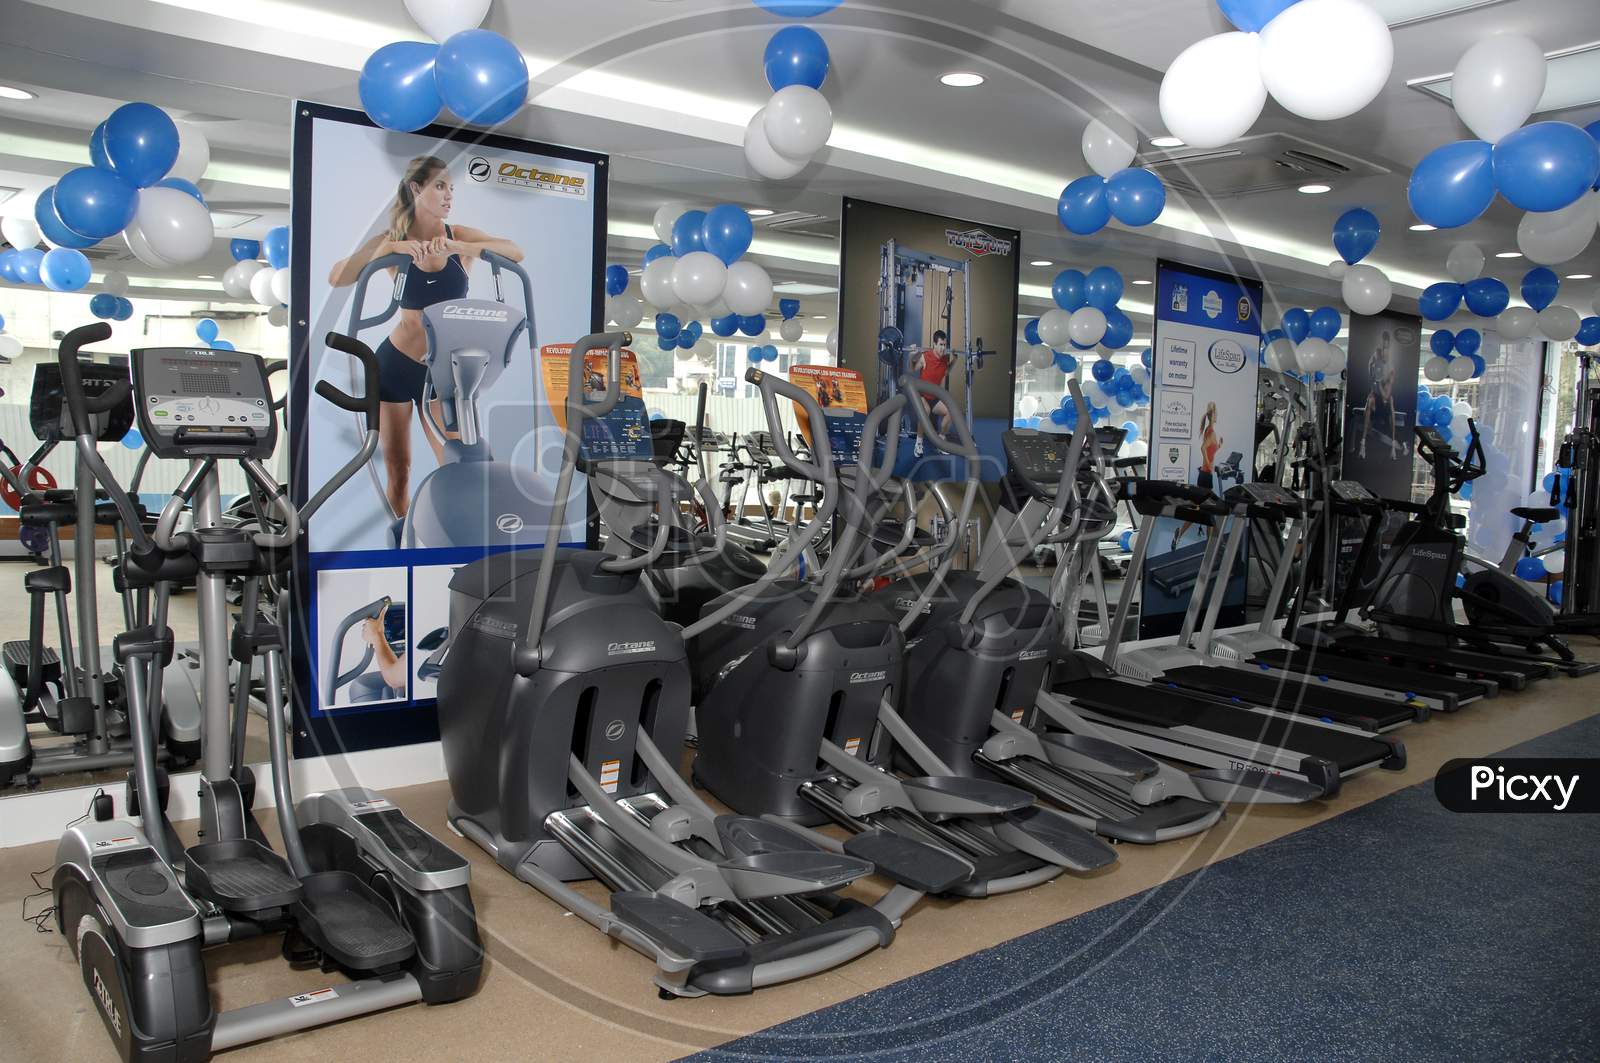 Modern exercise equipment in a new opened gym